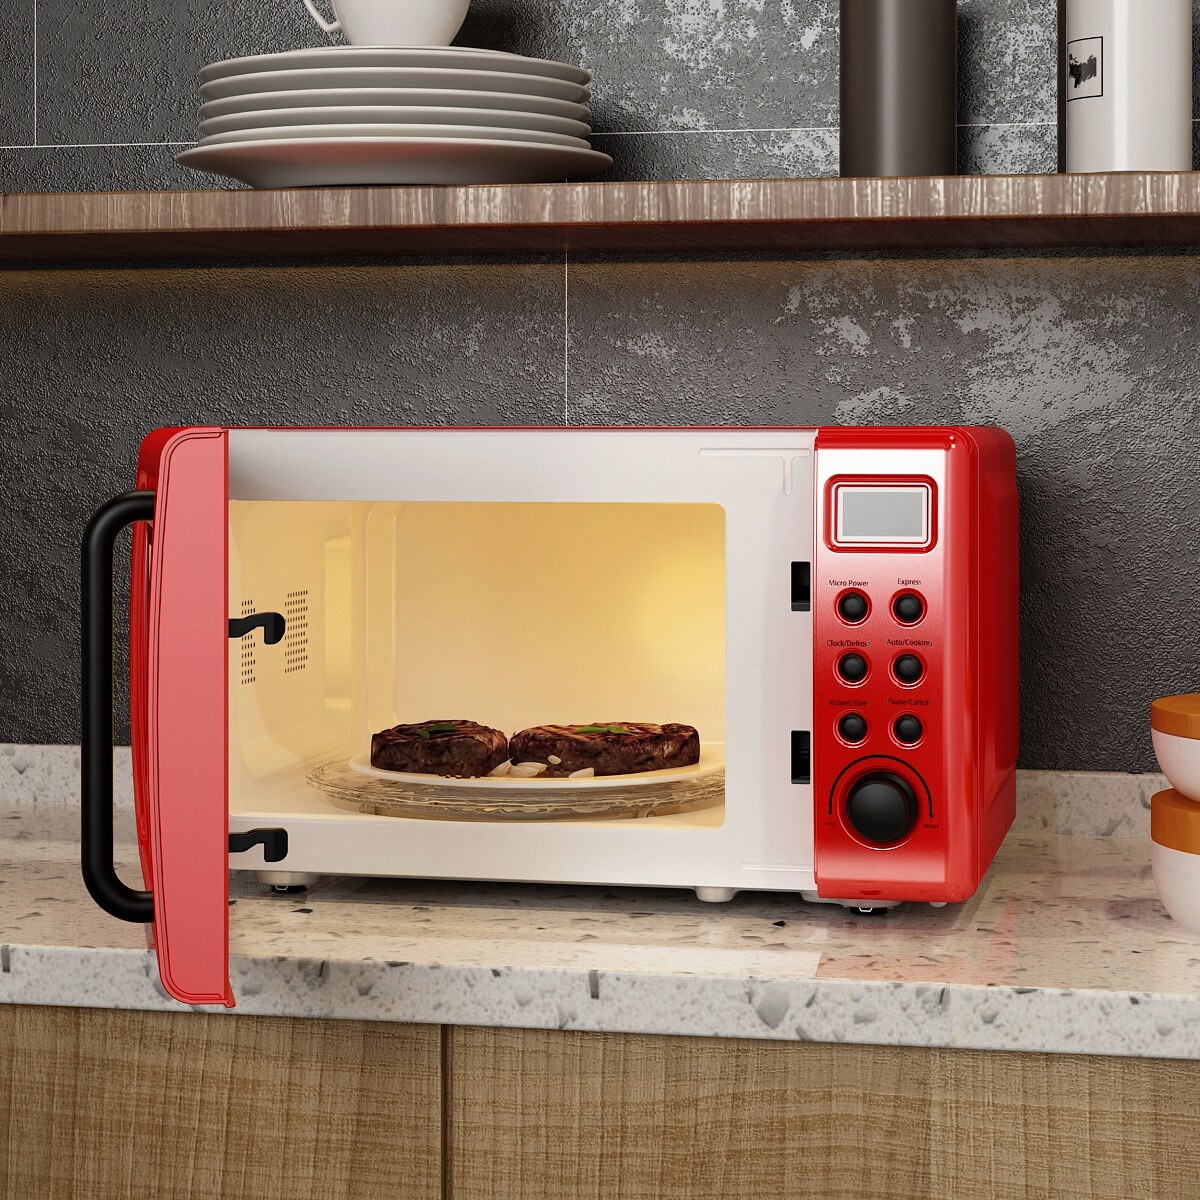 https://ak1.ostkcdn.com/images/products/is/images/direct/1f977e48589189af6a99f759812d41bedb4cc9a2/Costway-0.7Cu.ft-Retro-Countertop-Microwave-Oven-700W-LED-Display-Glass-Turntable-RedGreenblack-rose-gold.jpg